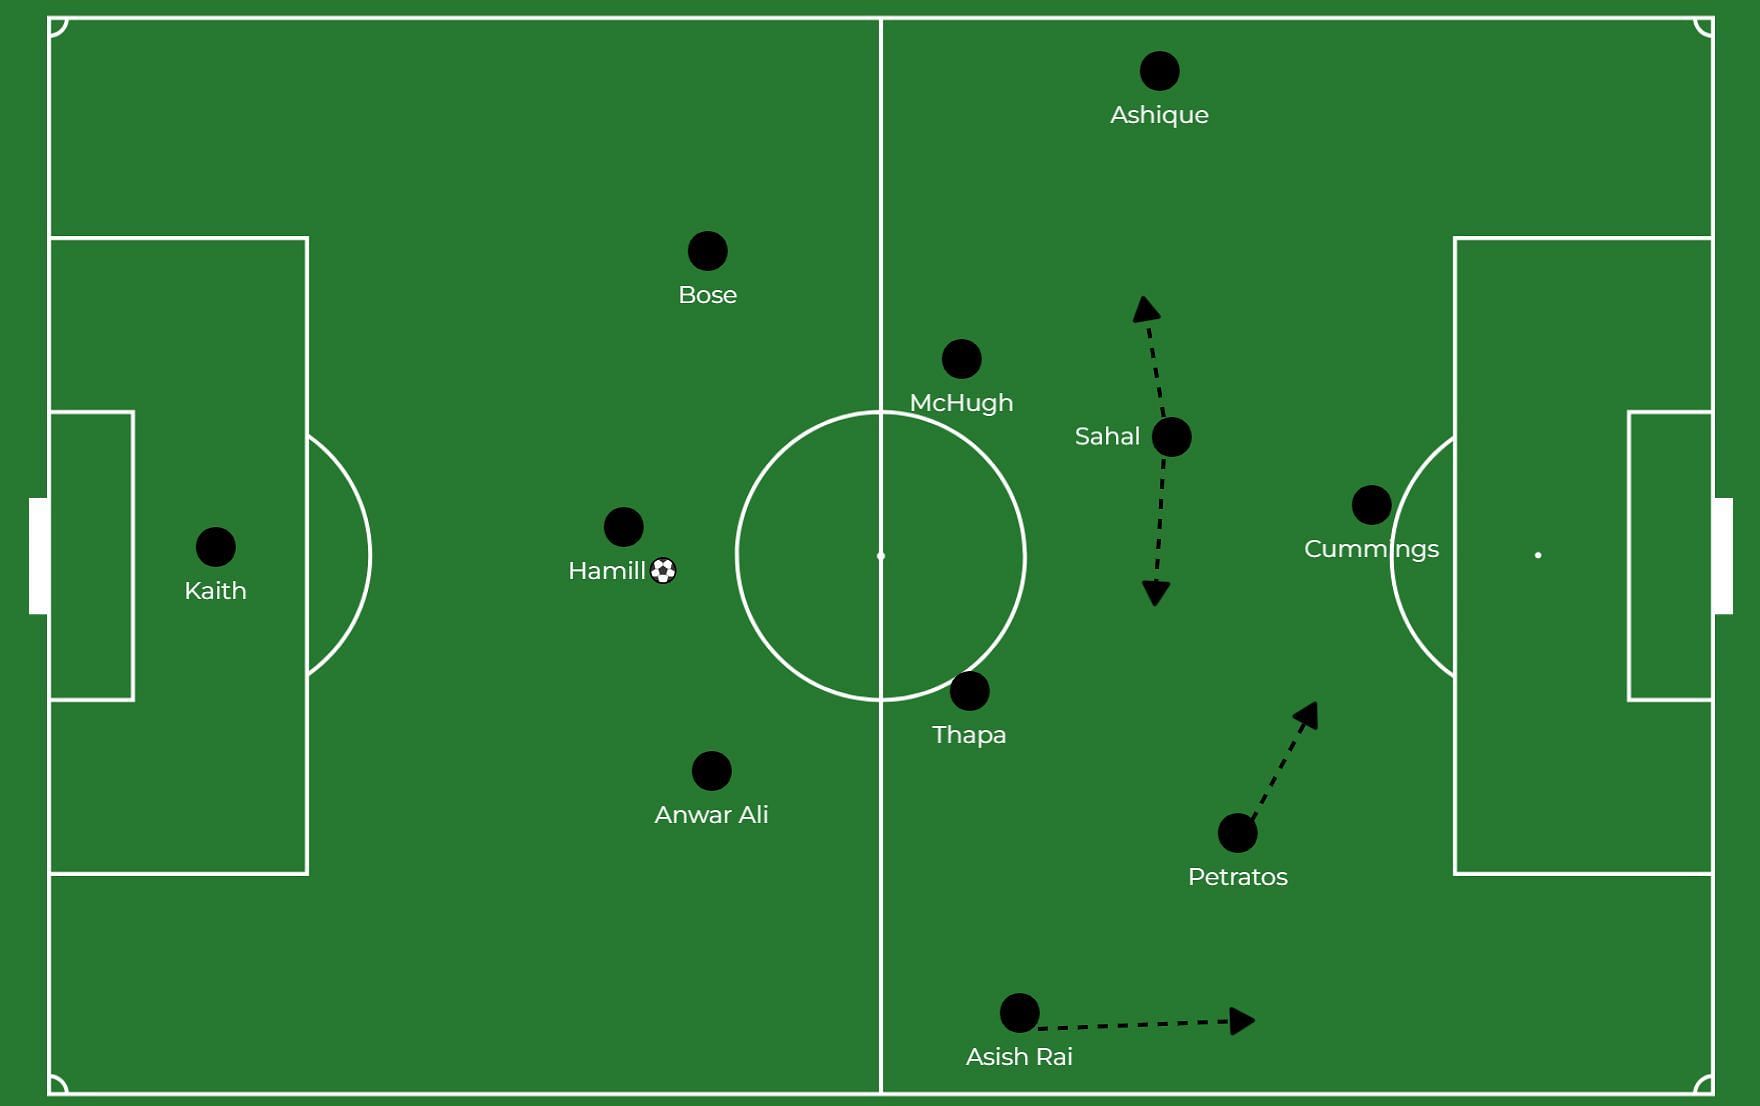 Mohun Bagan&#039;s positional fluidity in attack could be an important part of how the team operates